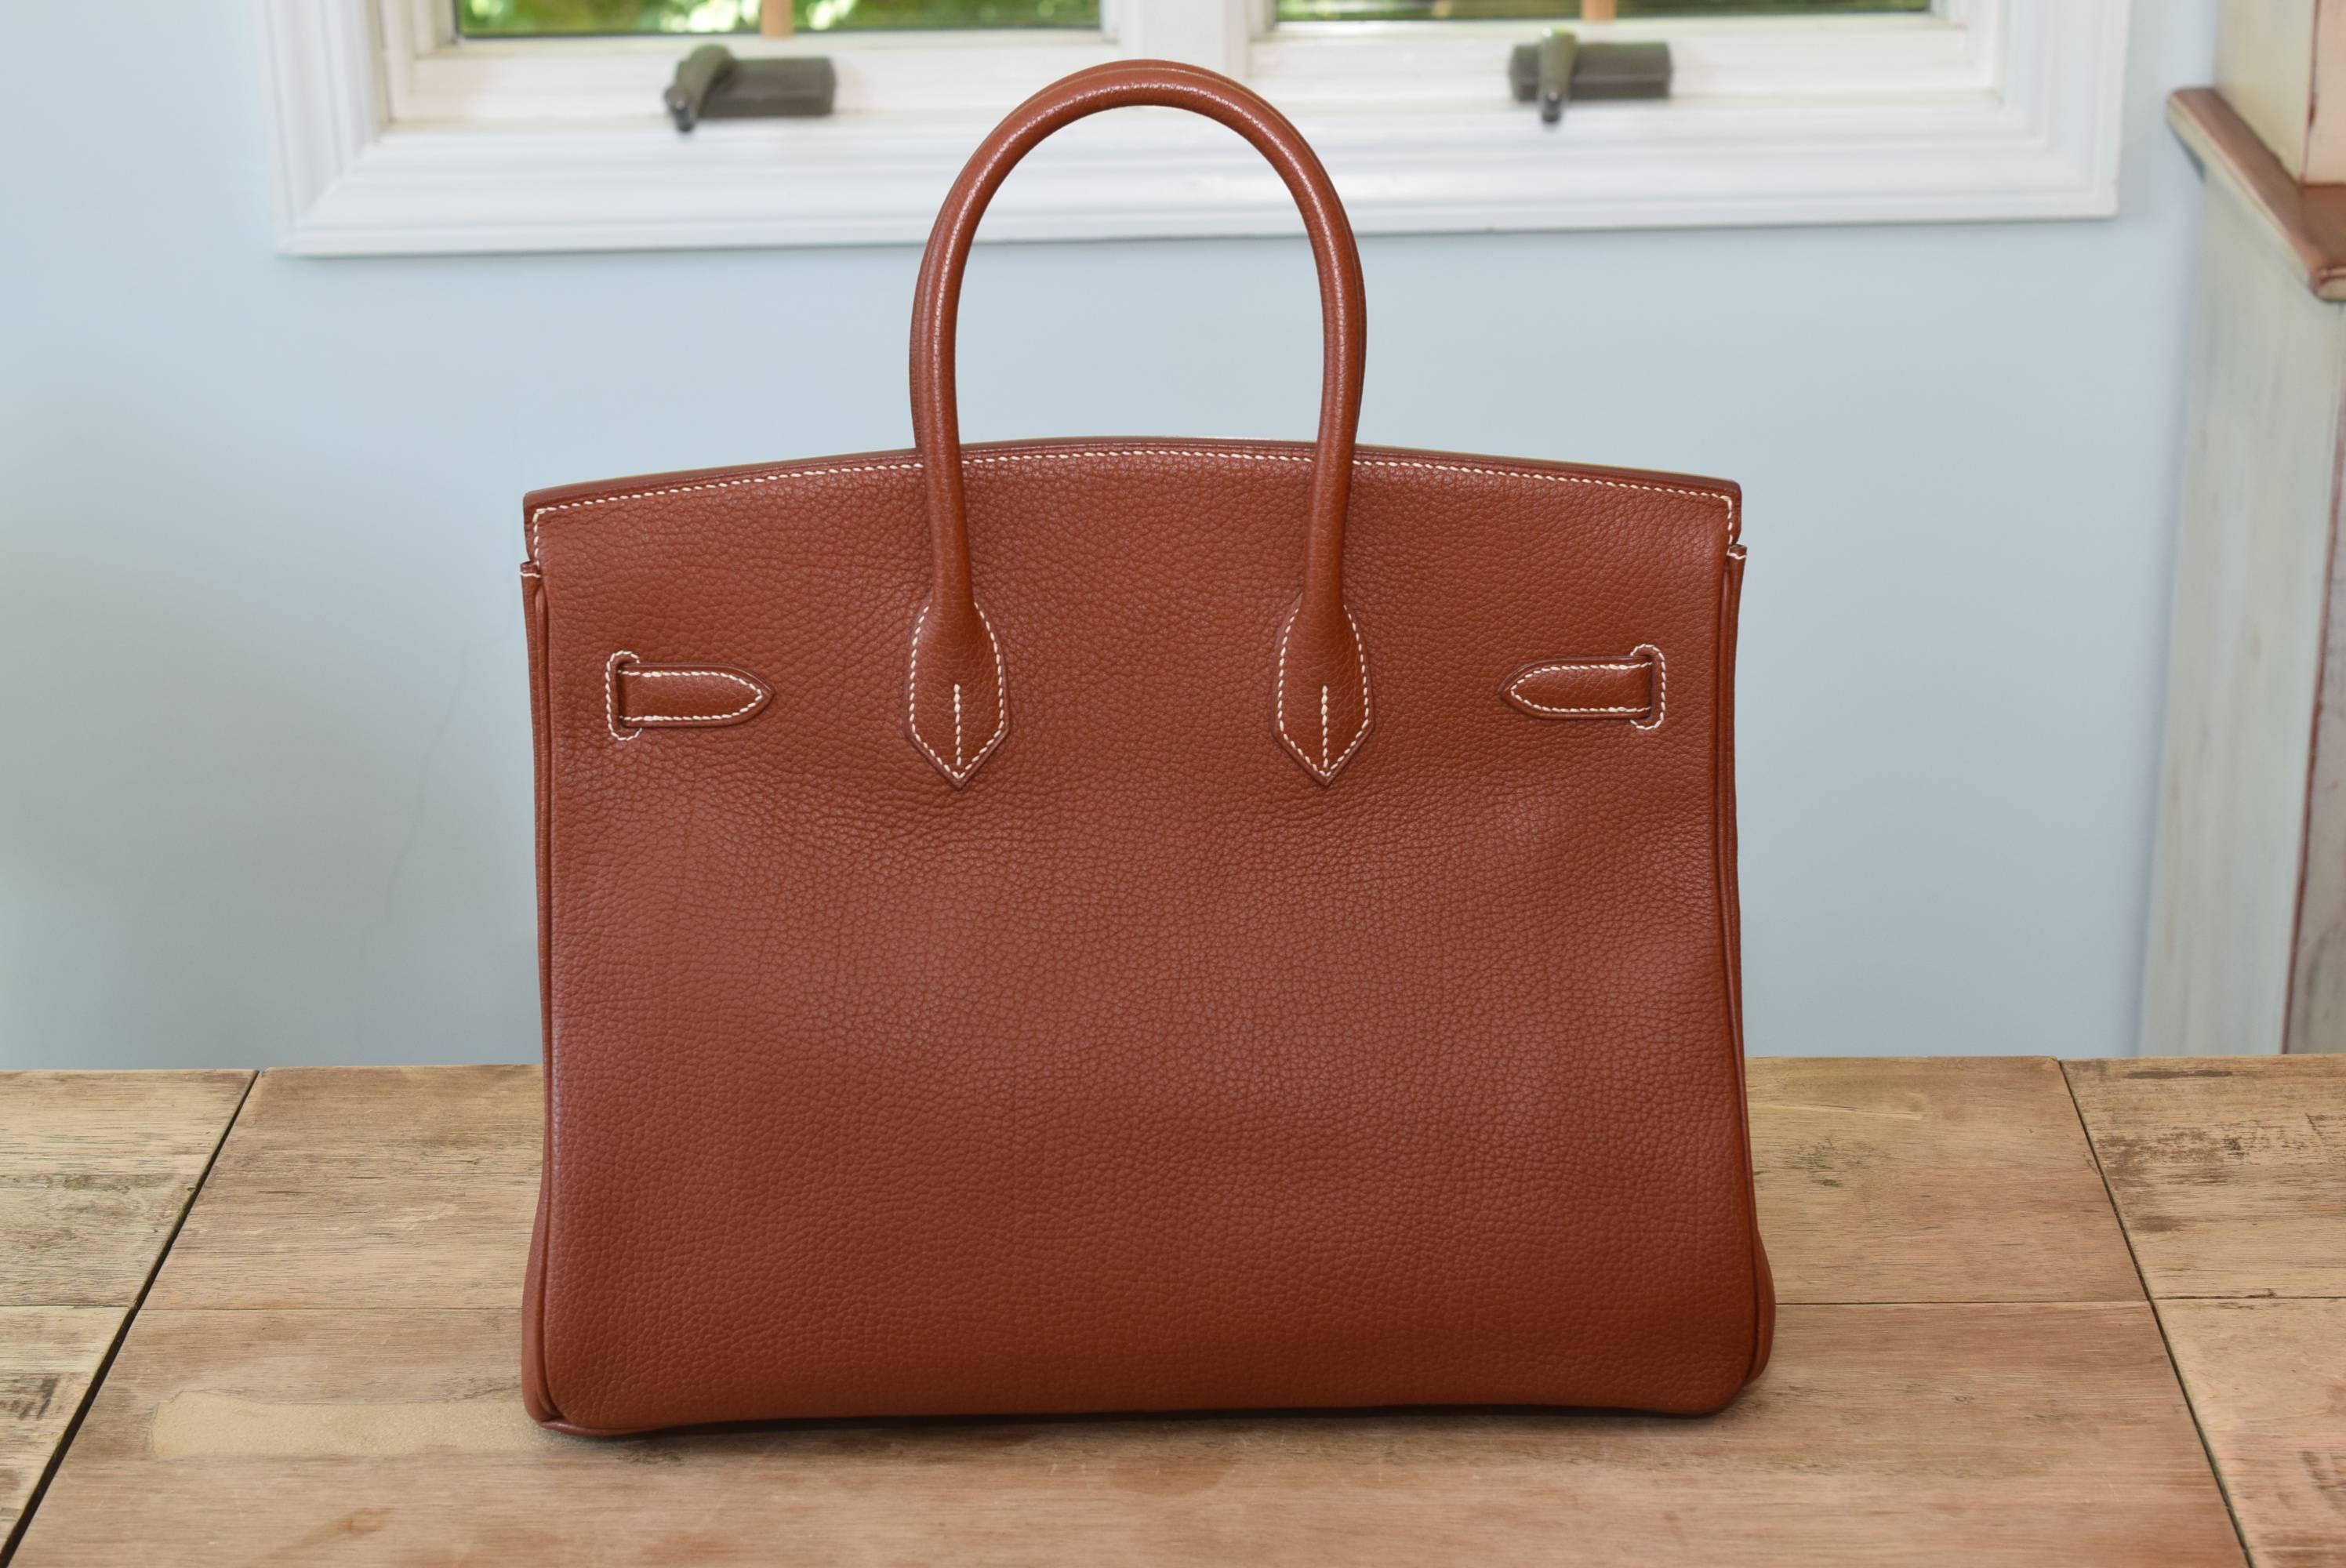 Hermes Togo Birkin 35cm in beautiful Noisette Brown.  Perfect color for every season! This Birkin is in excellent condition with minor wear on the corners and faint scratches on the gold hardware (which can be polished out).  Inside is very clean. 